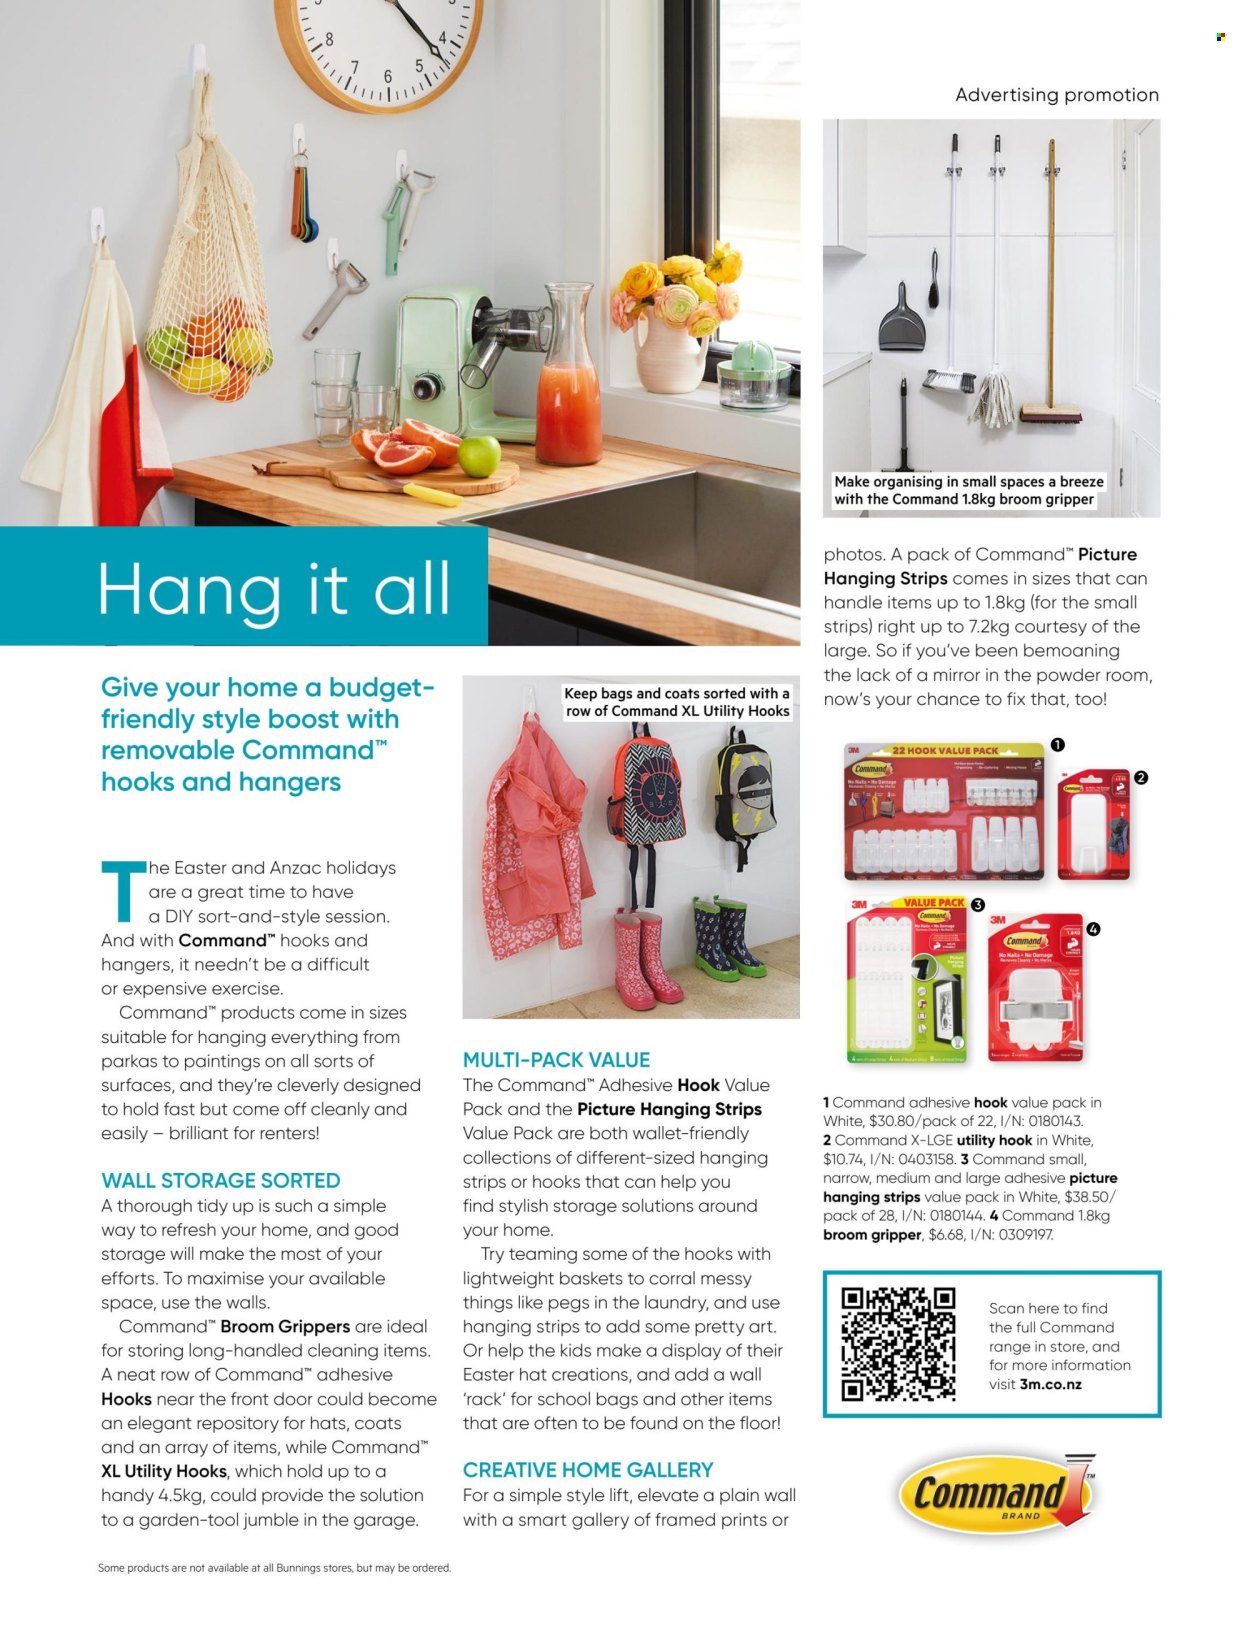 thumbnail - Bunnings Warehouse mailer - Sales products - Lack, mirror, picture hanging strip, basket, hanger, broom, adhesive. Page 11.